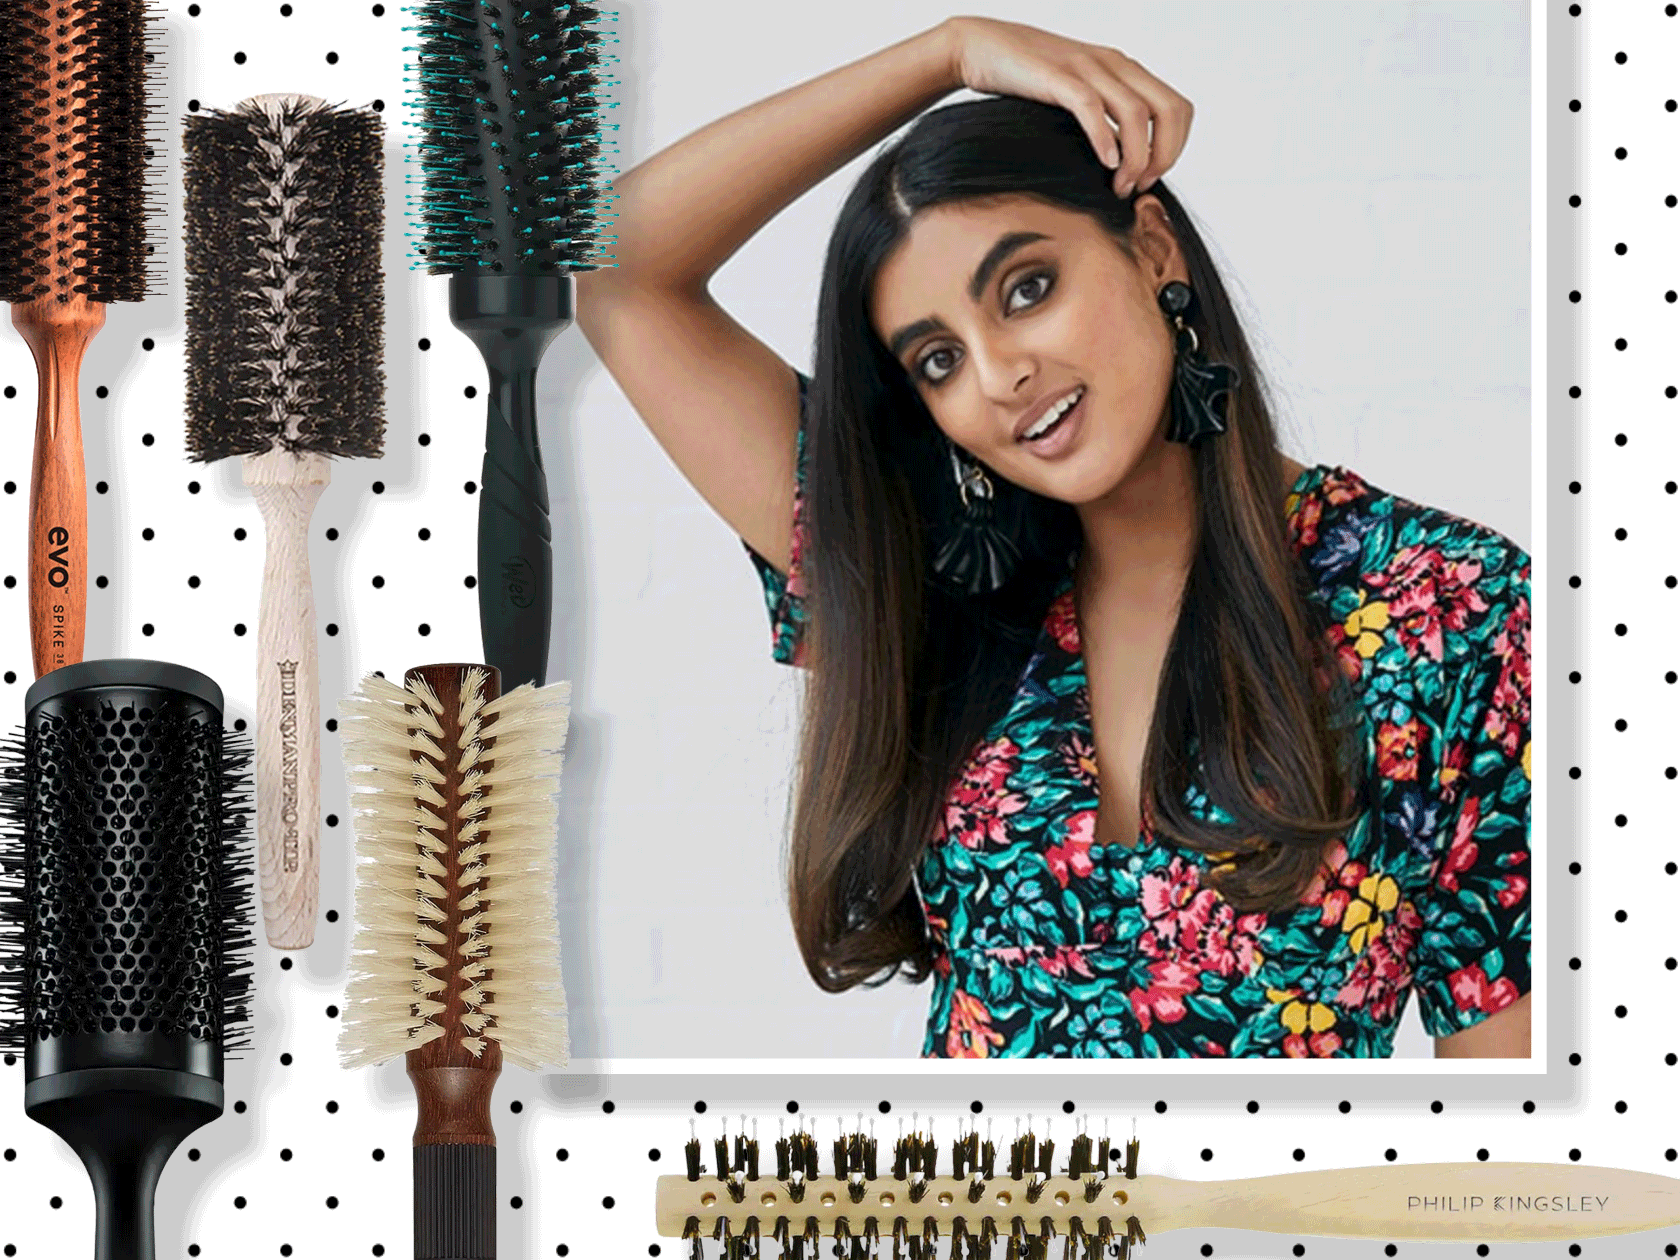 10 best round brushes for every type of hair and style